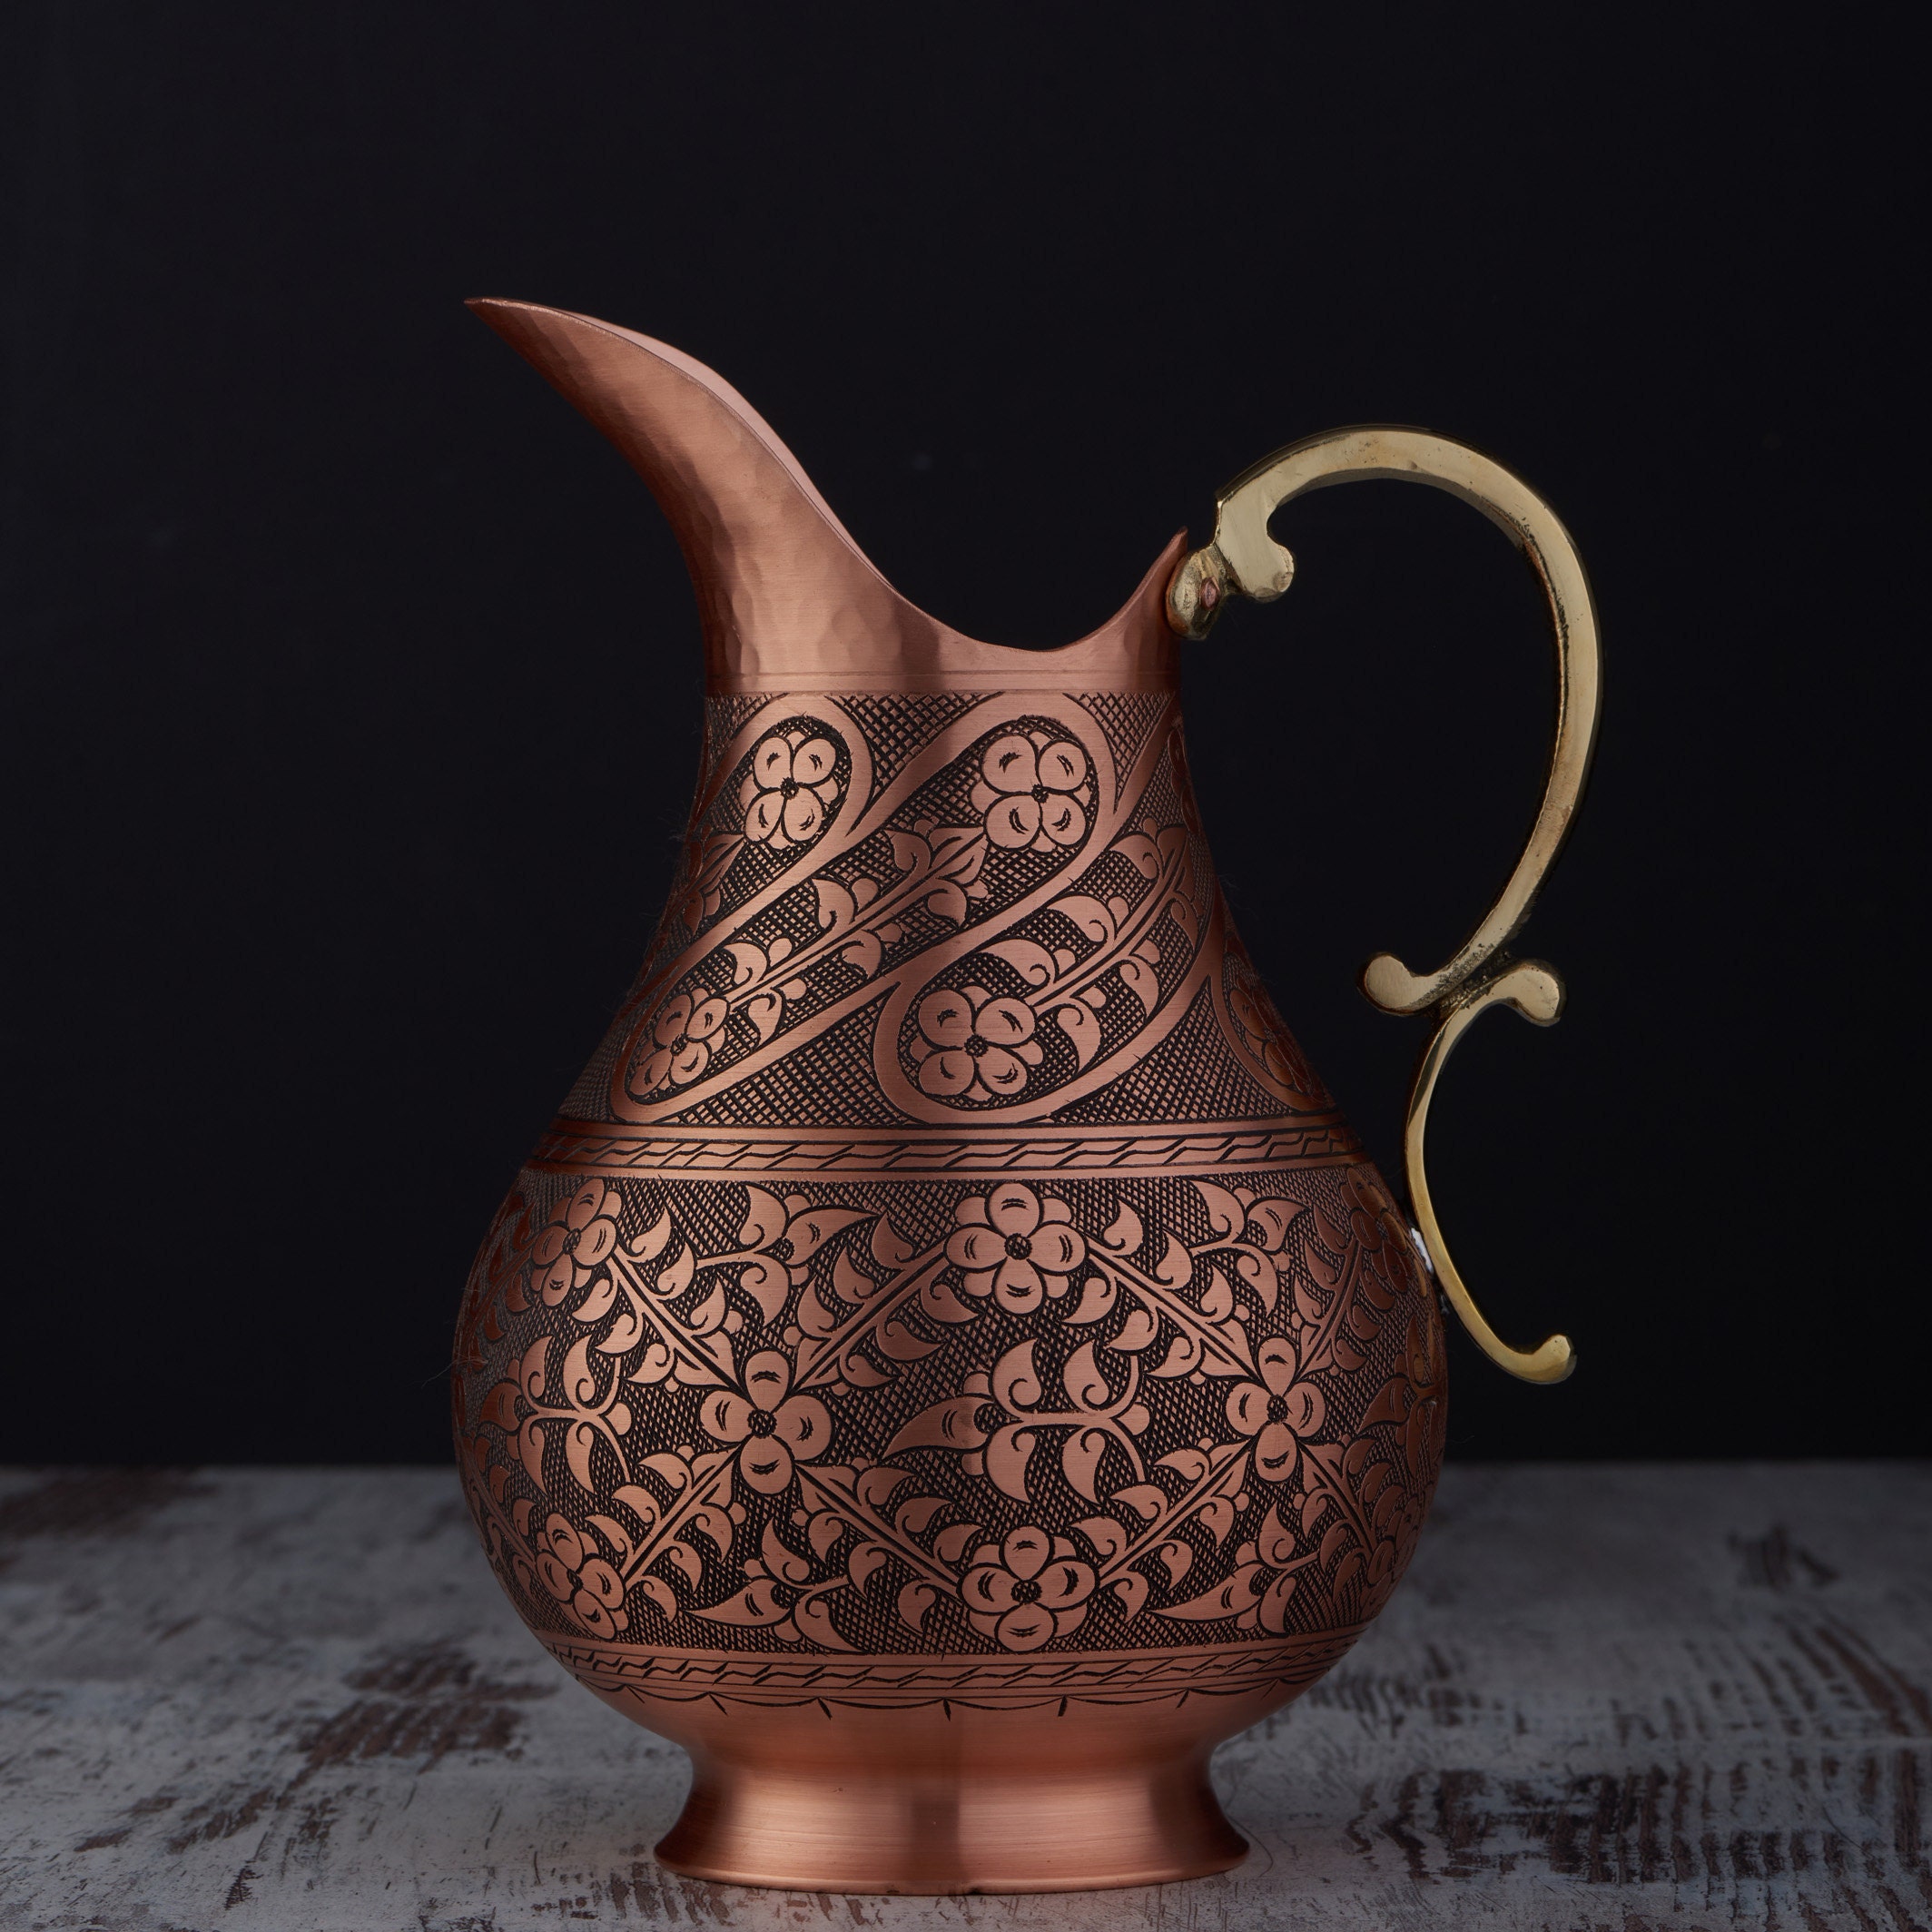 DEMMEX The Pitcher 1mm Solid Copper Handmade Engraved Copper Pitcher Vessel Ayurveda Jug for Drinking Water Moscow Mule Antiqued-Engraved Cocktail 